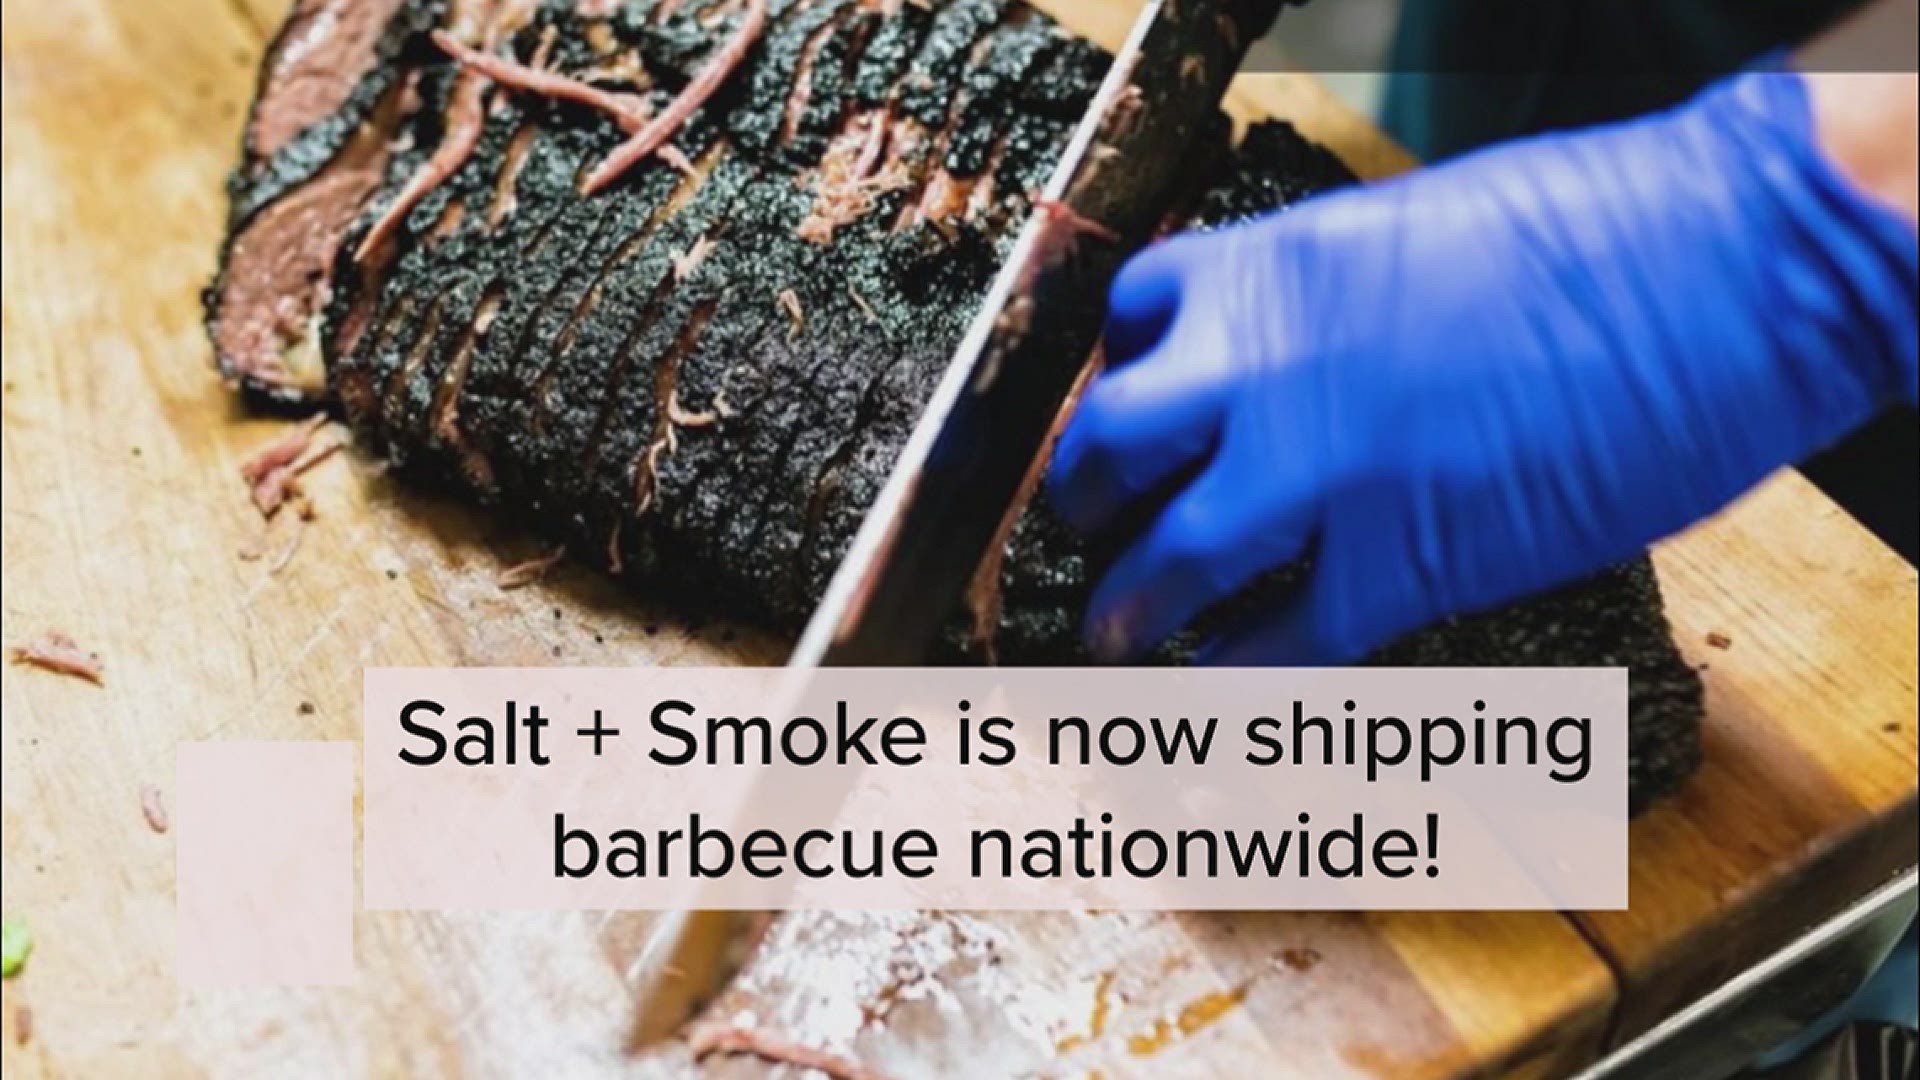 “Now every city and household can have authentic and outstanding BBQ from the best. Friendship included at no extra cost,” Salt + Smoke wrote on Instagram